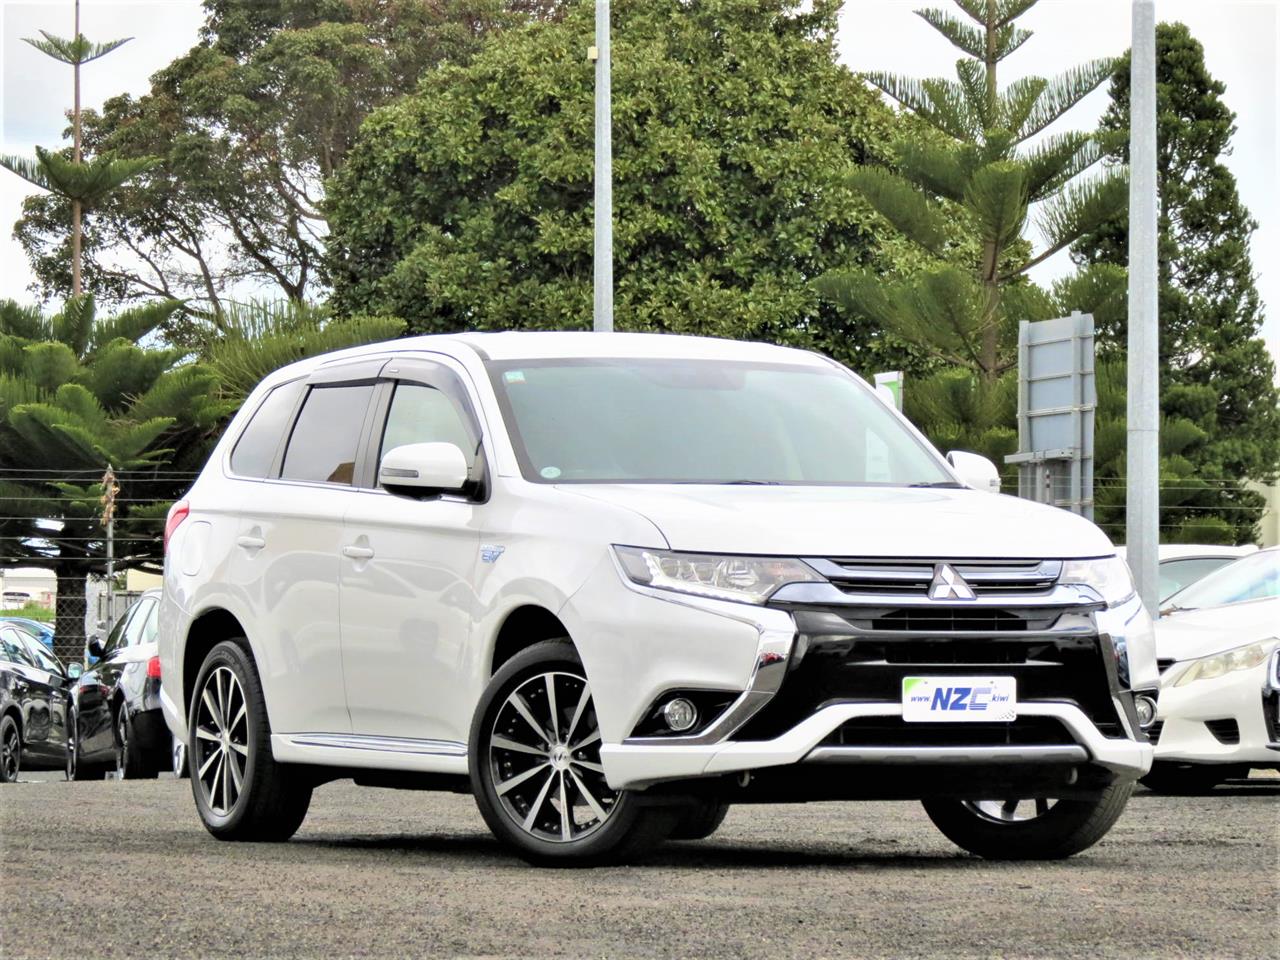 NZC 2016 Mitsubishi Outlander just arrived to Auckland